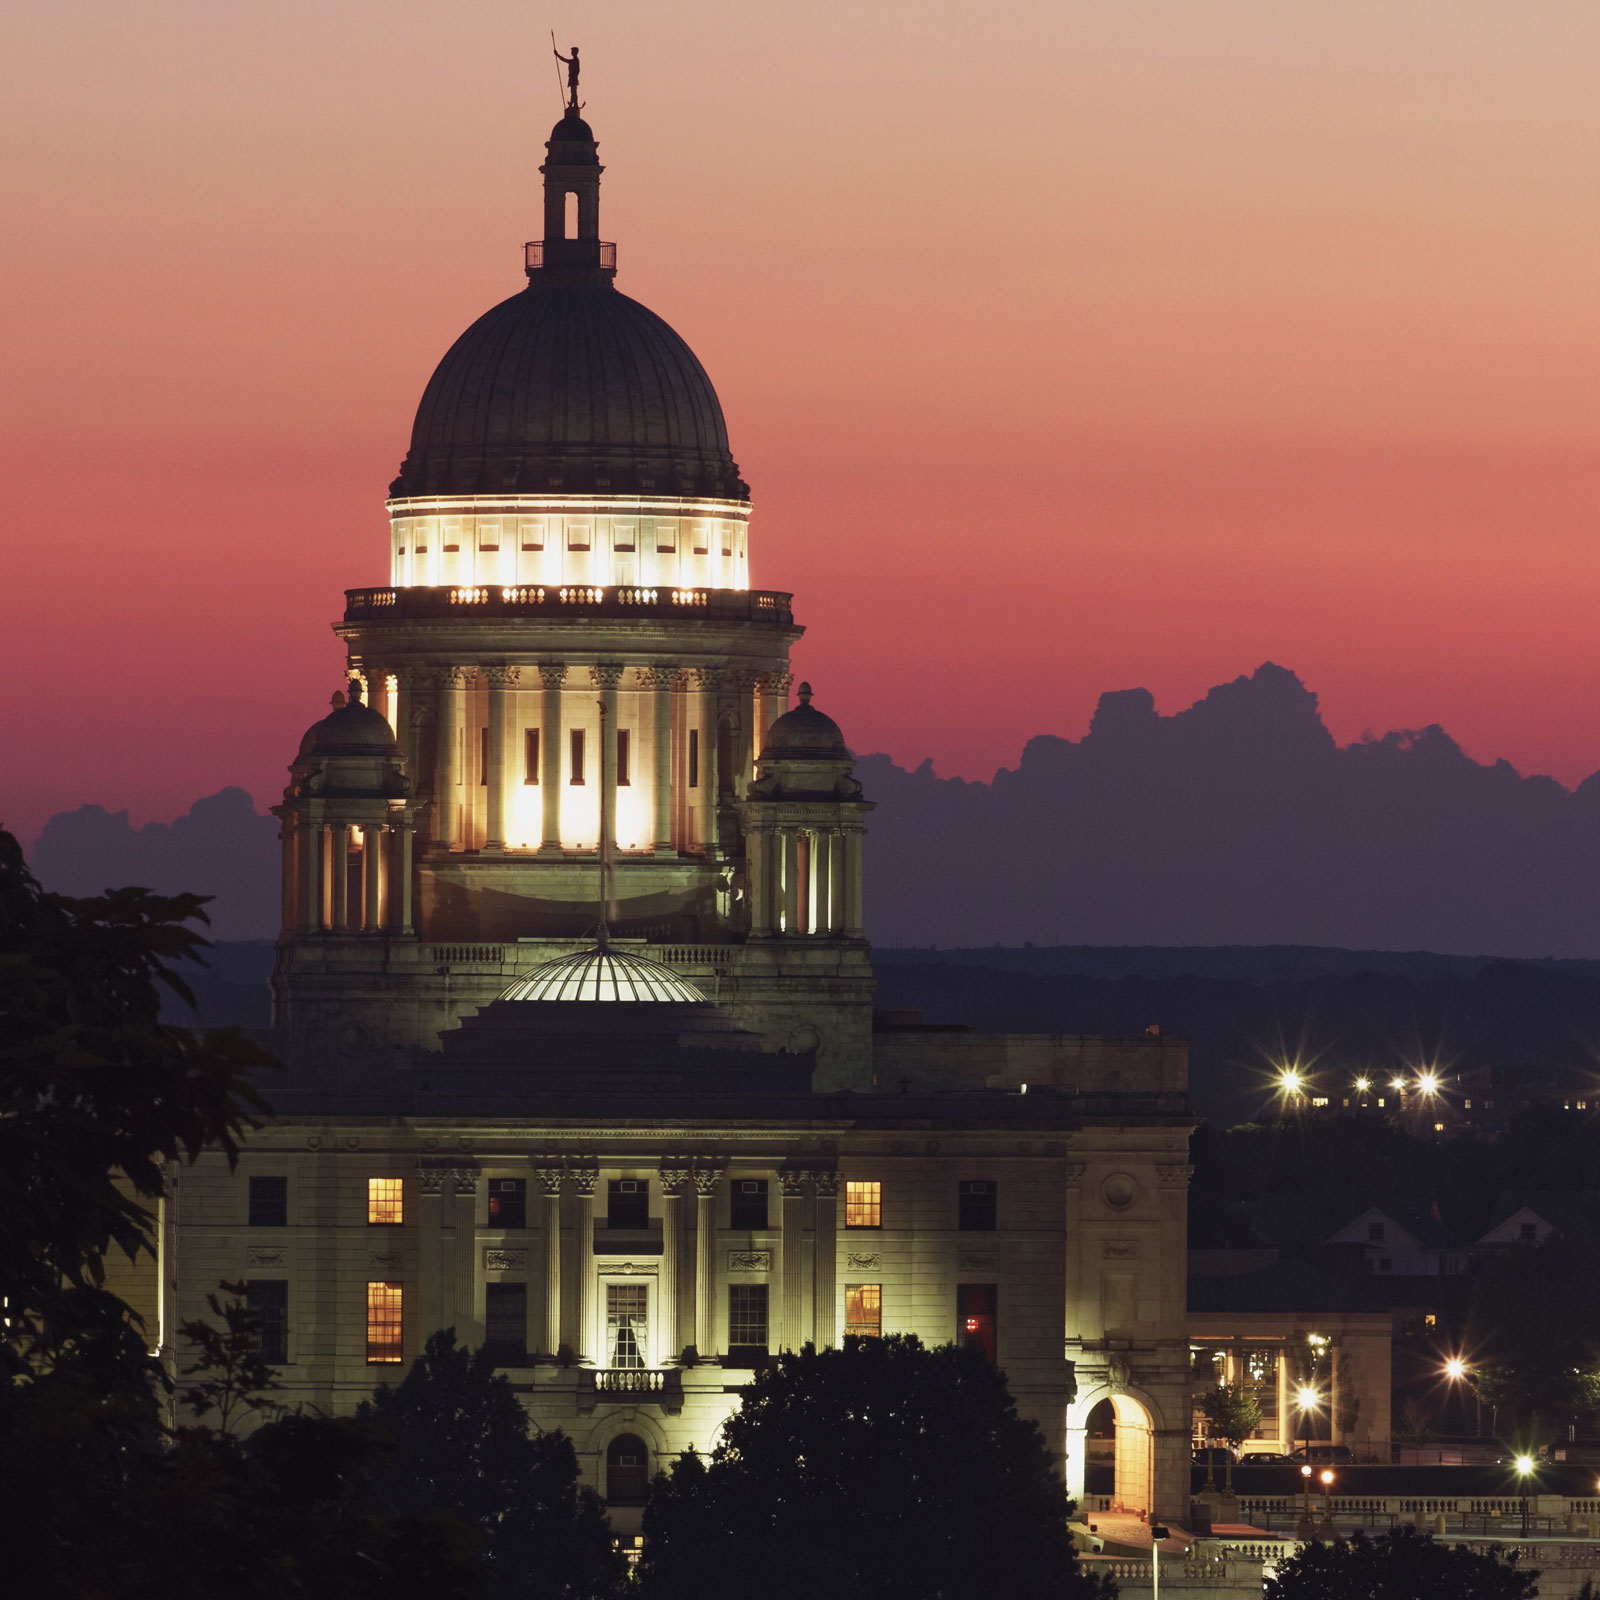 A beautiful scenery background of Rhode Island State House at Sunset